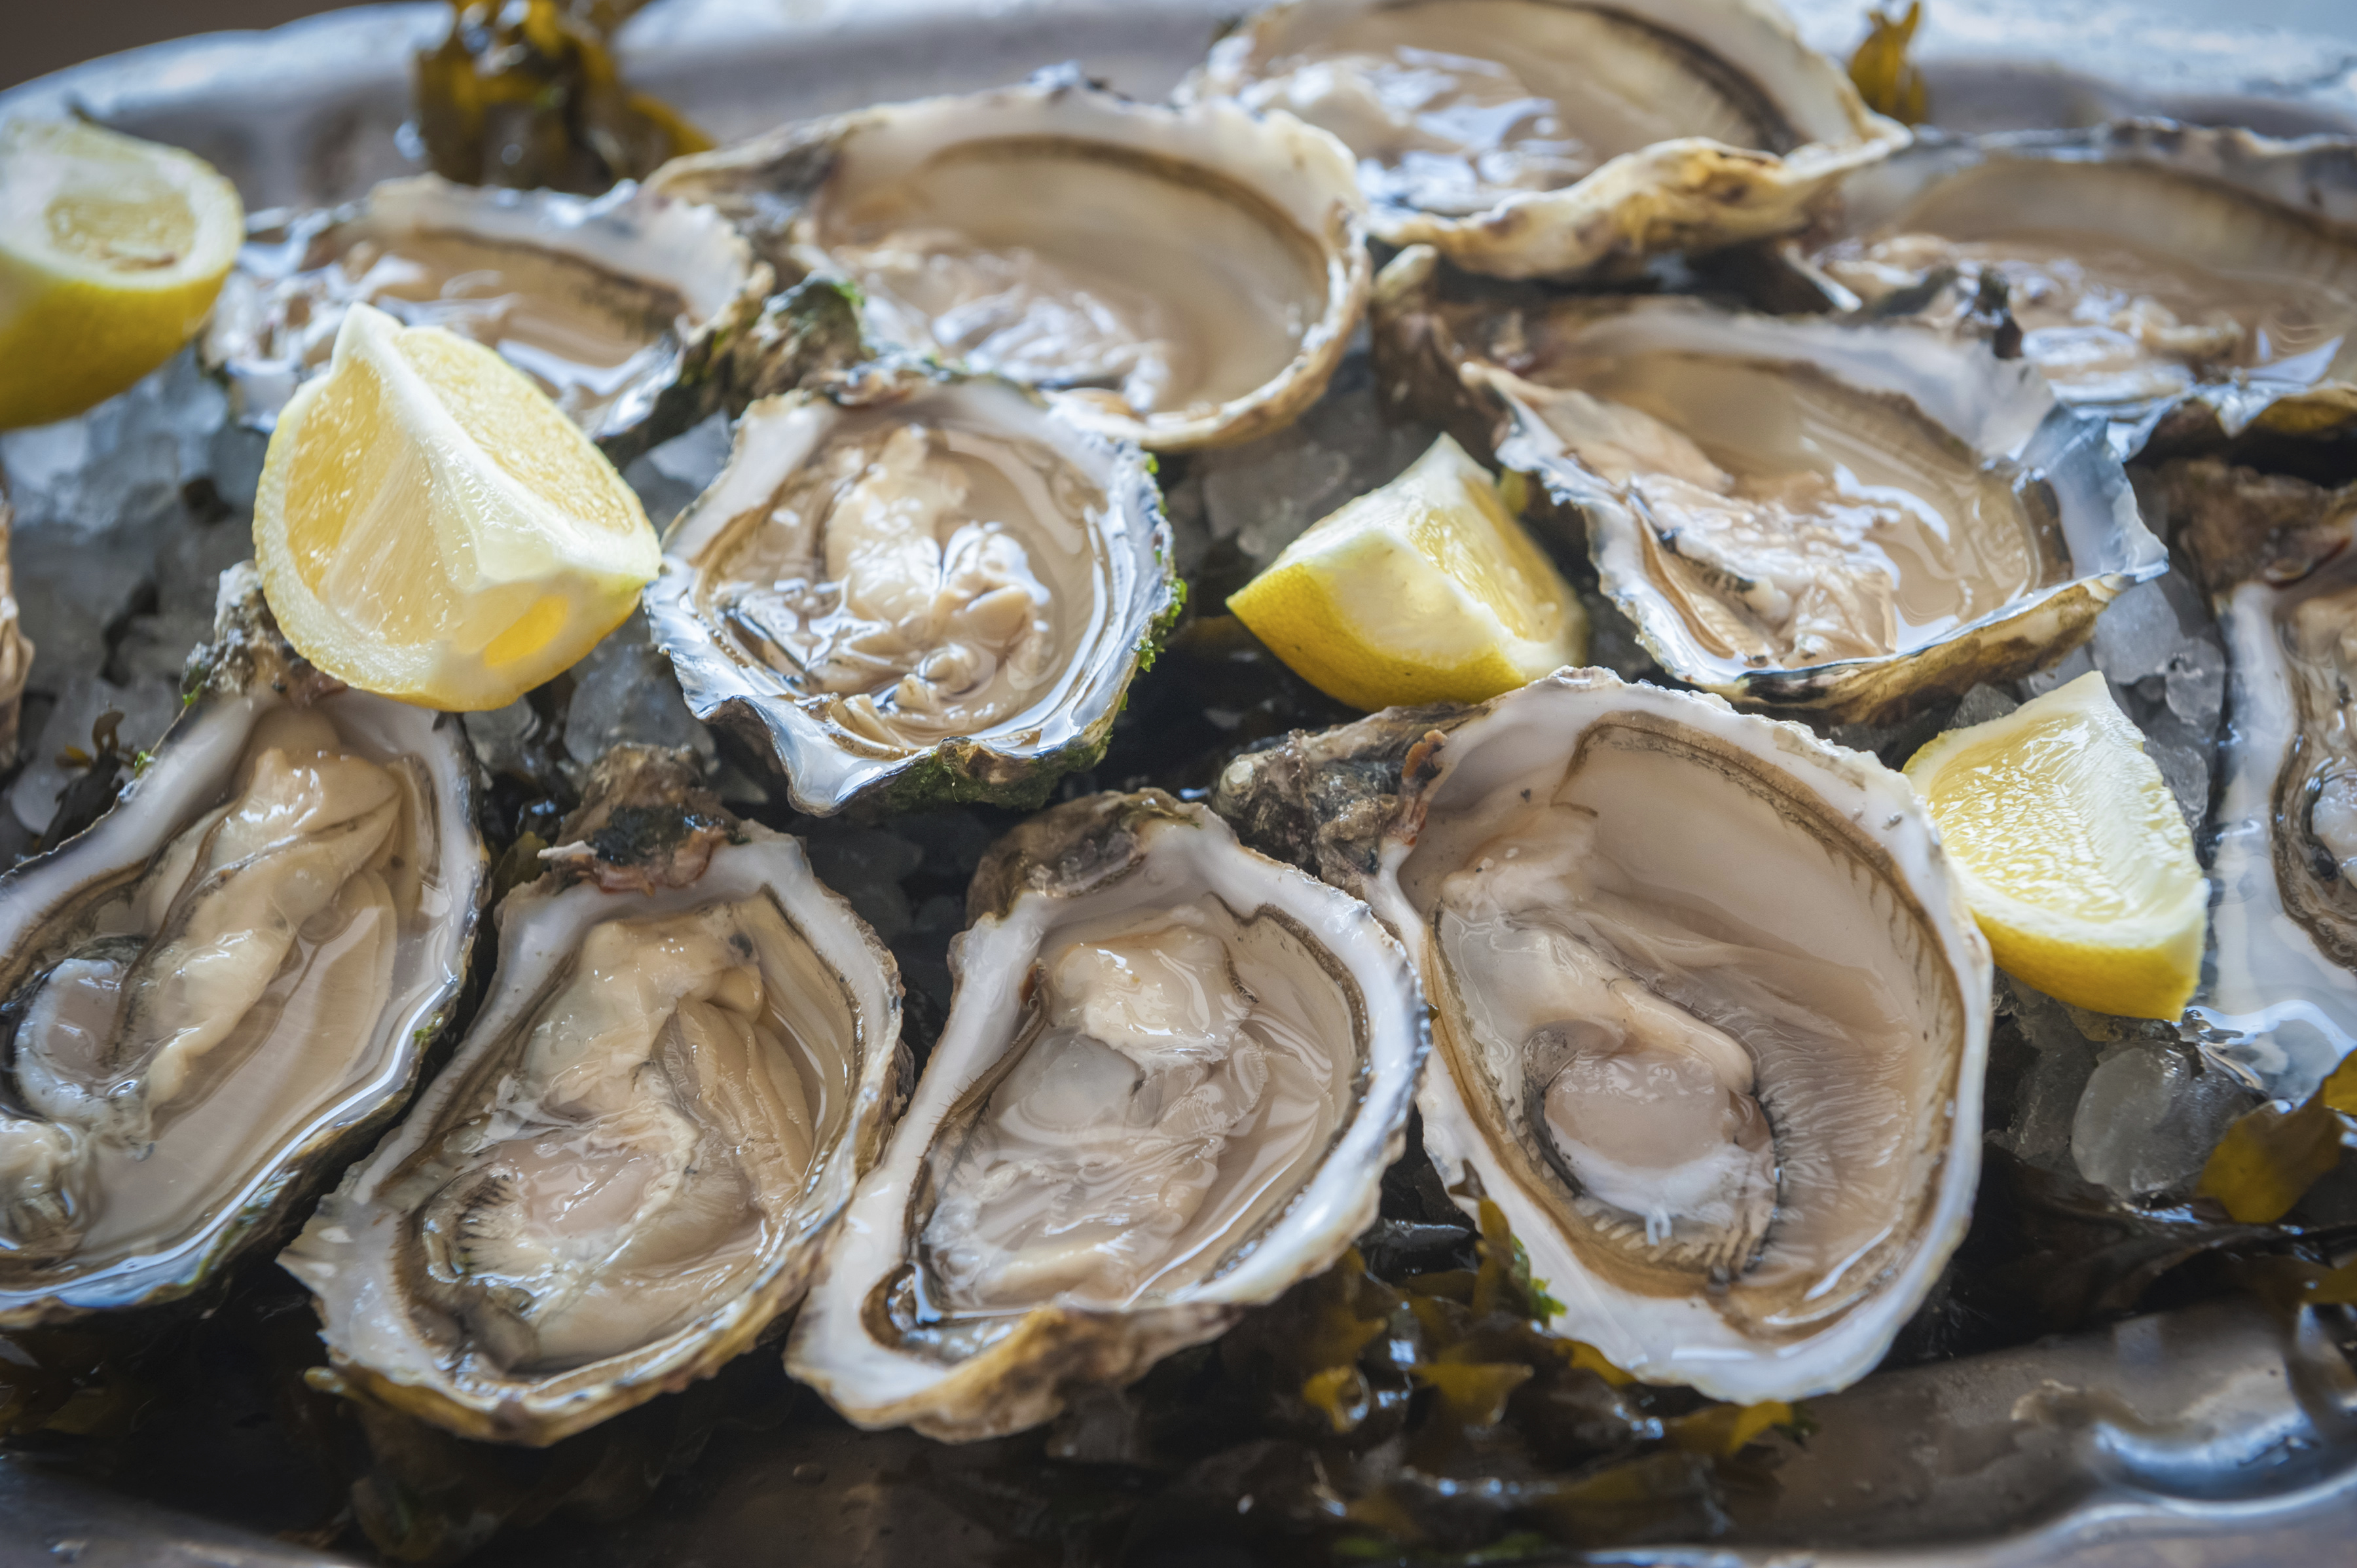 The Best Places to Get Oysters on the Cape - CapeCod.com